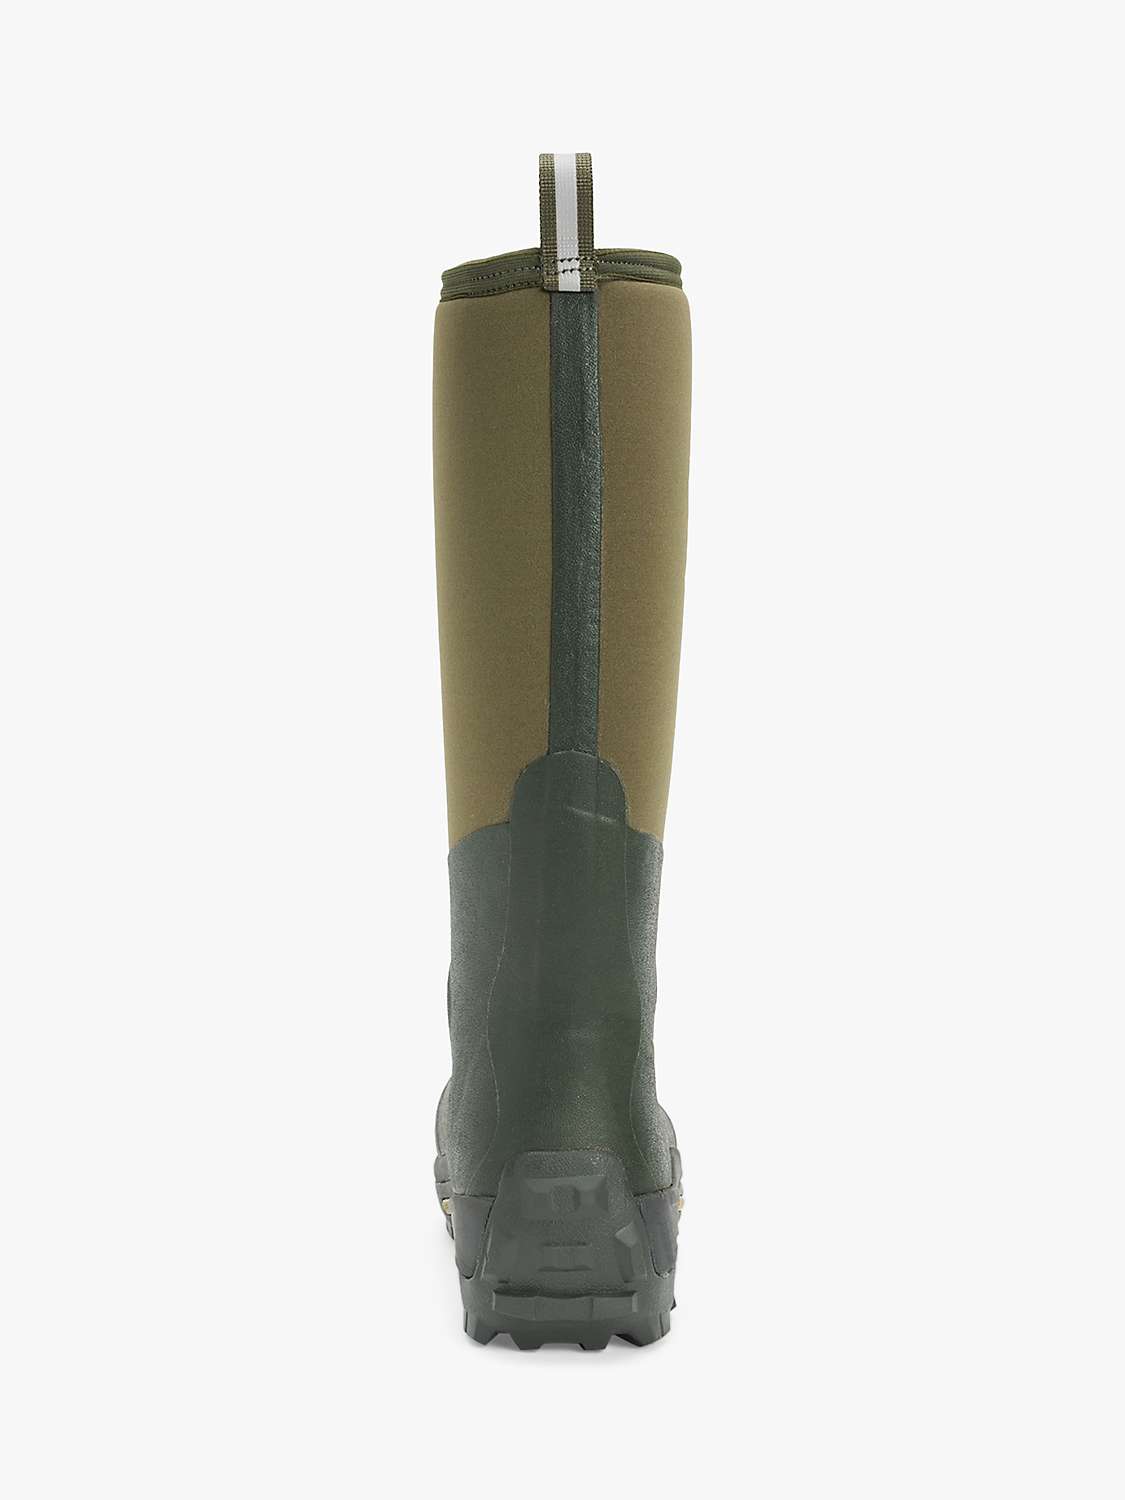 Buy Muck Arctic Sport Pull On Wellington Boots Online at johnlewis.com